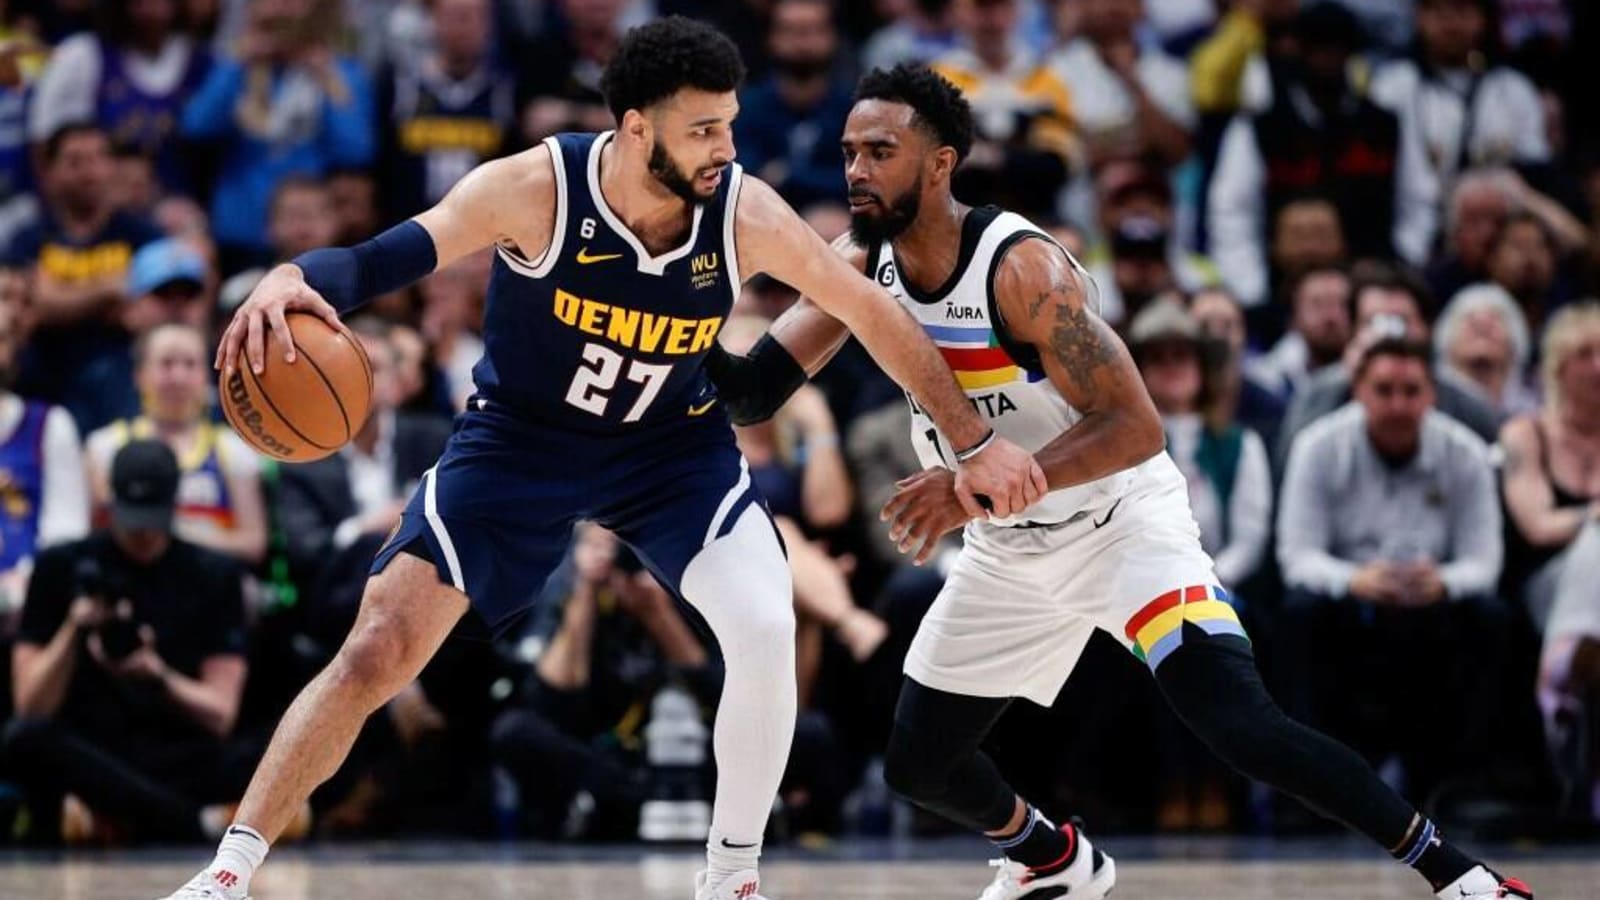 Watch Minnesota Timberwolves vs Denver Nuggets (Game 3): Free Live Streaming, Start Time and TV Channel